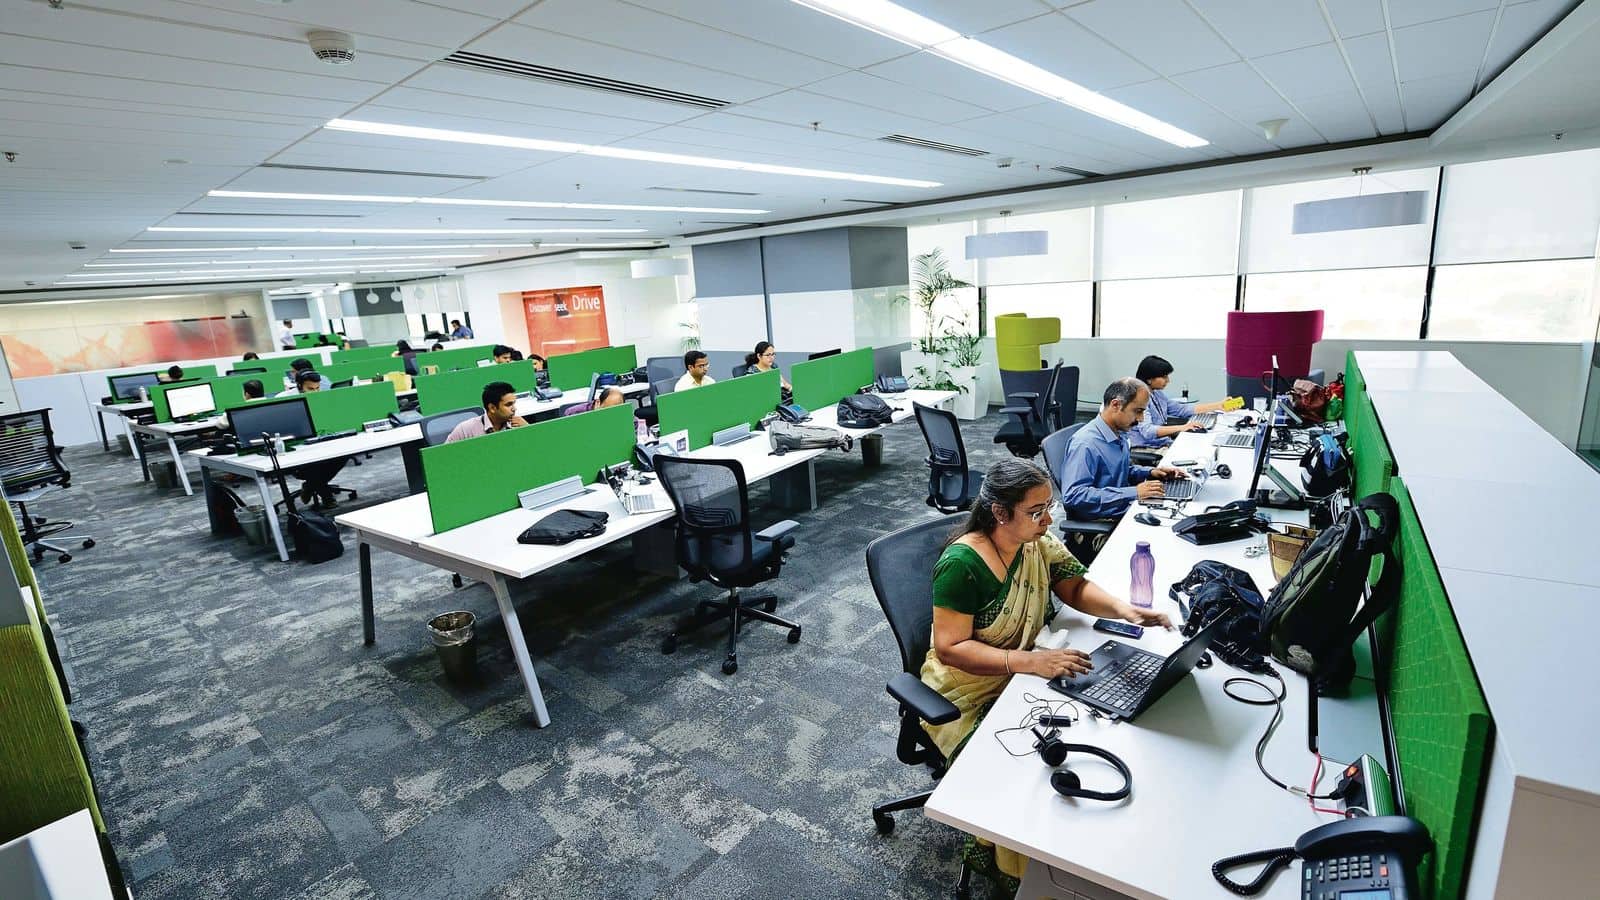 Grade A Office Absorption In Pune To Touch 5.5 Mn Sq Ft